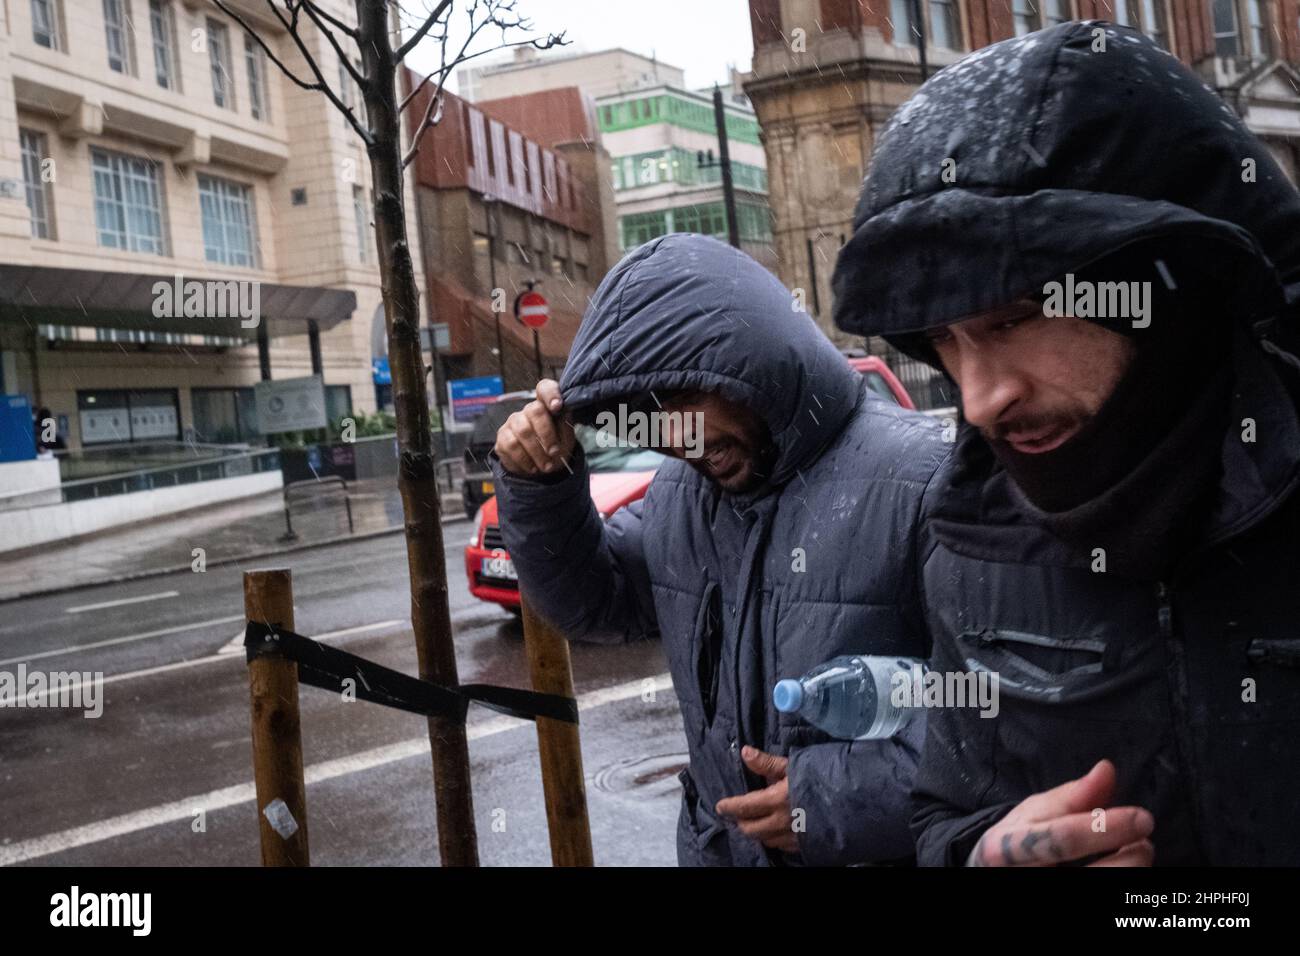 Two men make their way along a wet and windy London street during a rain shower Stock Photo